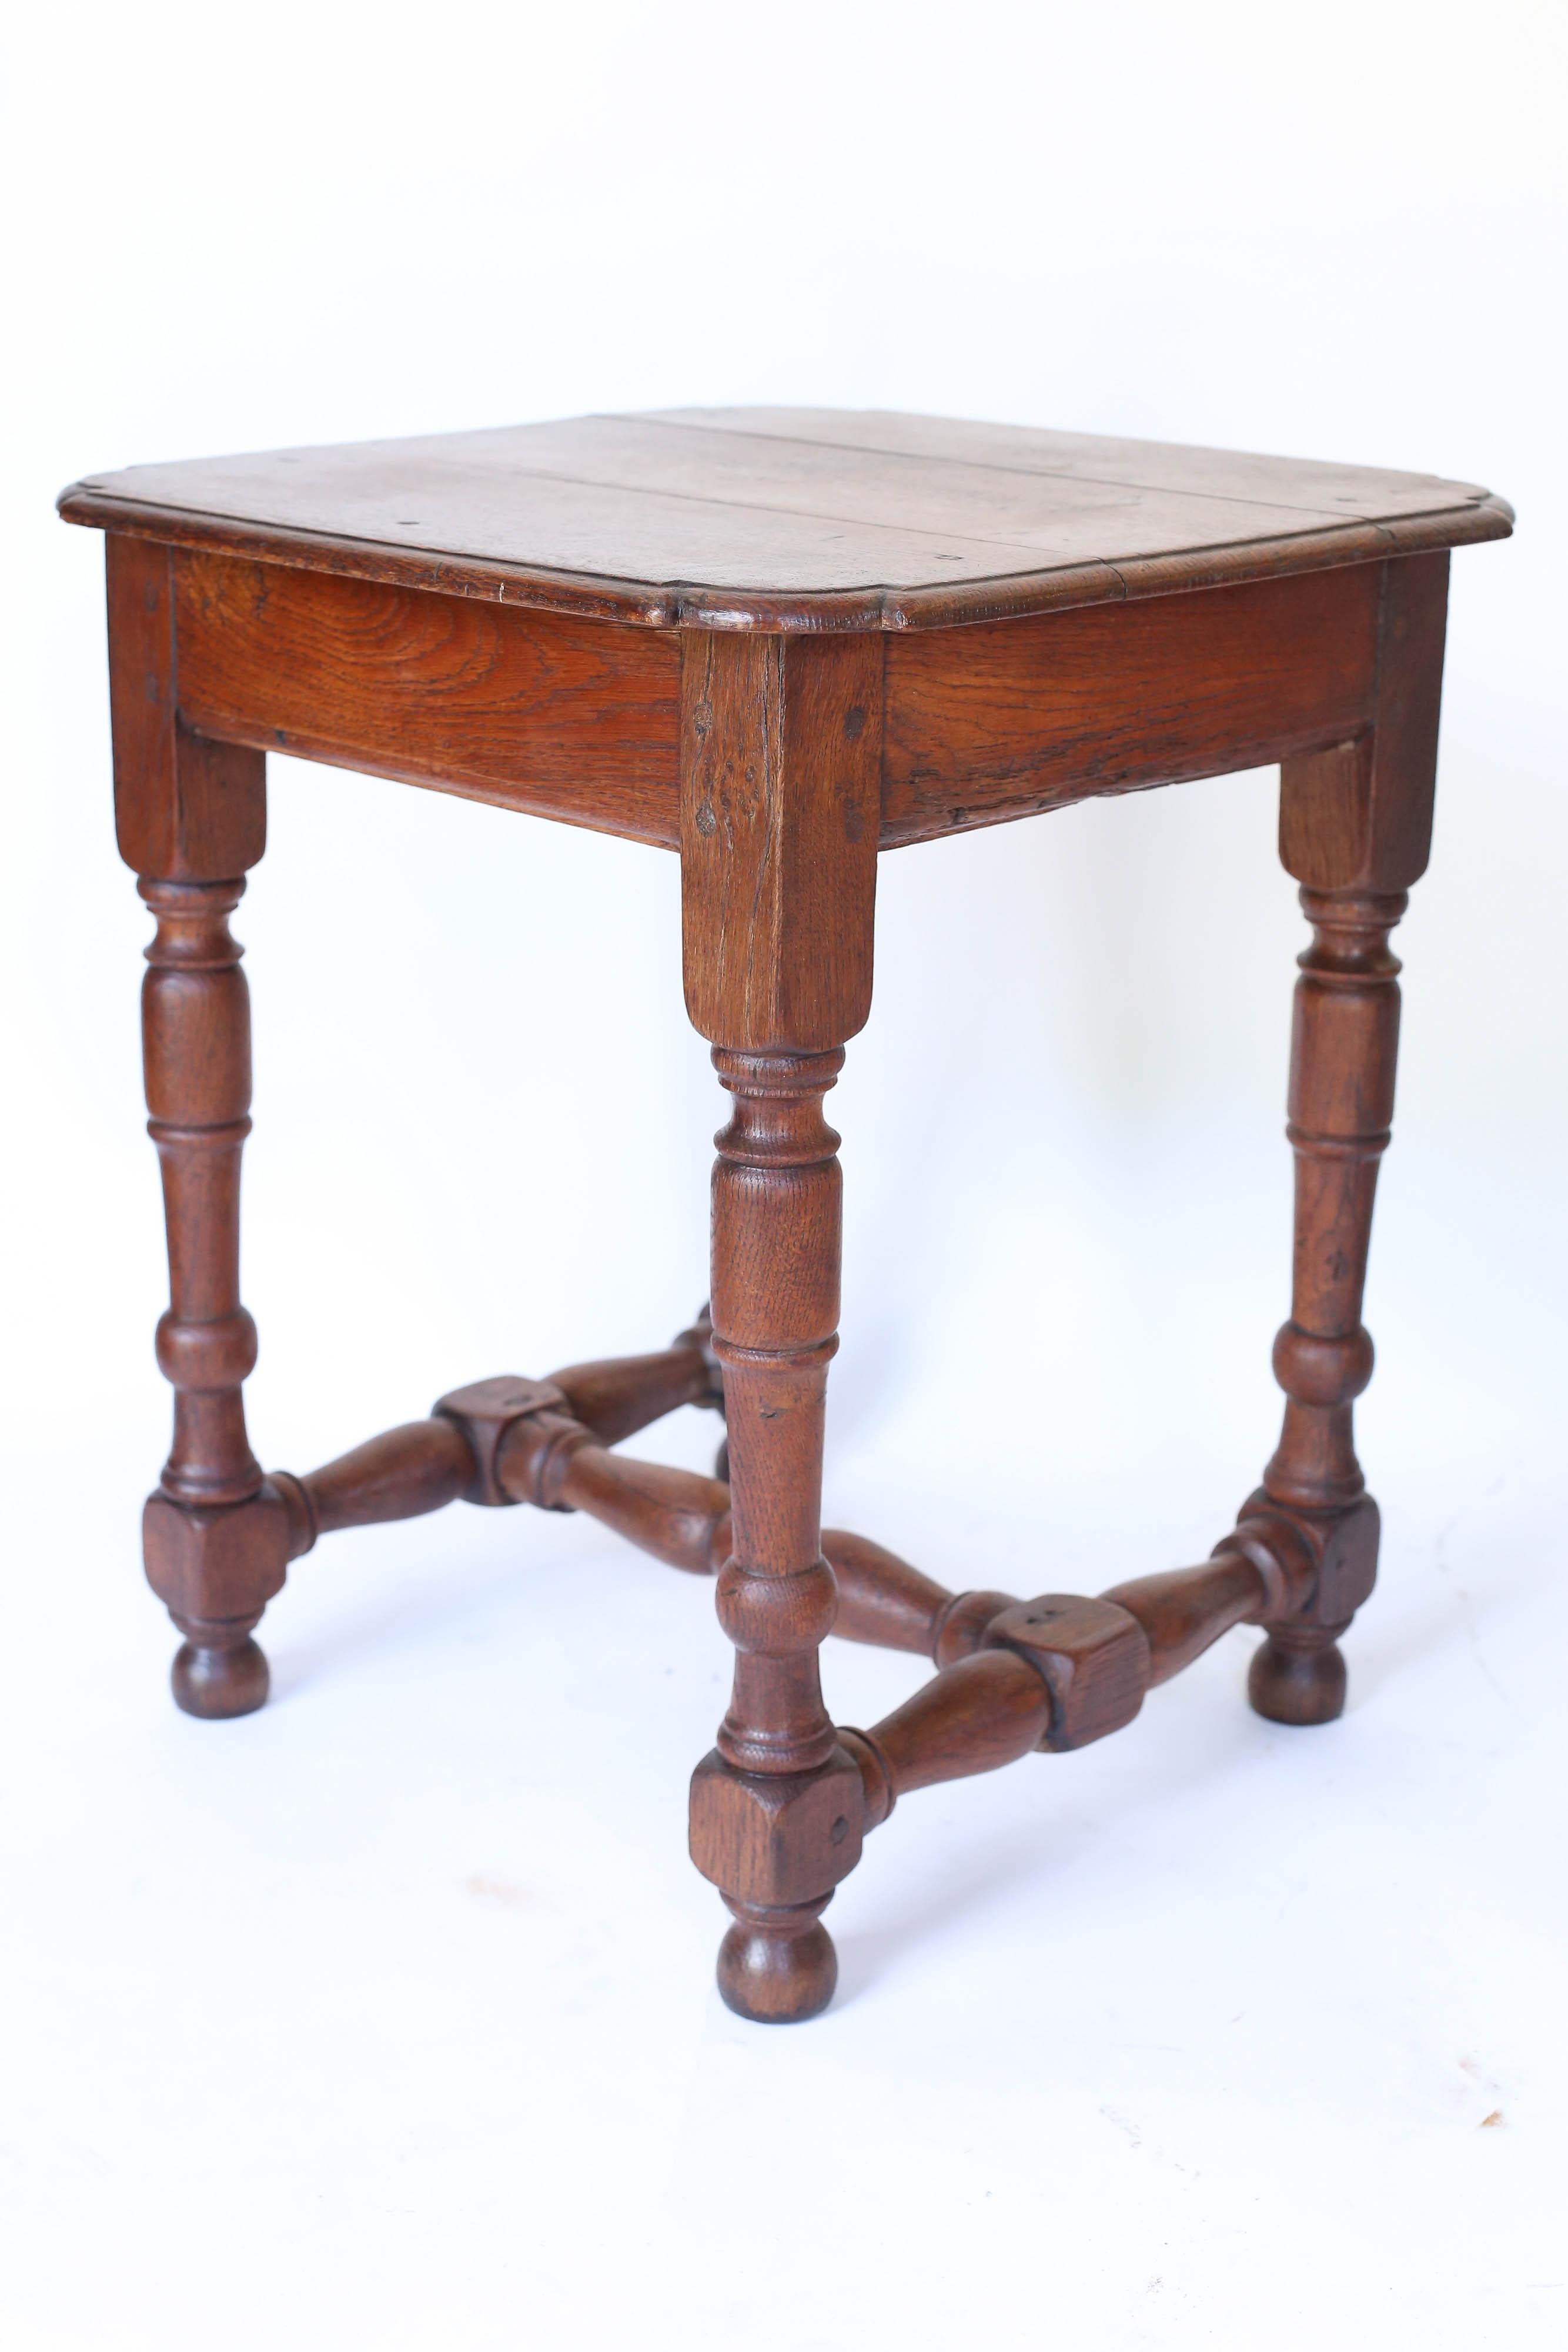 19th Century Pair of Oak Turned Leg Side Tables with Drawer